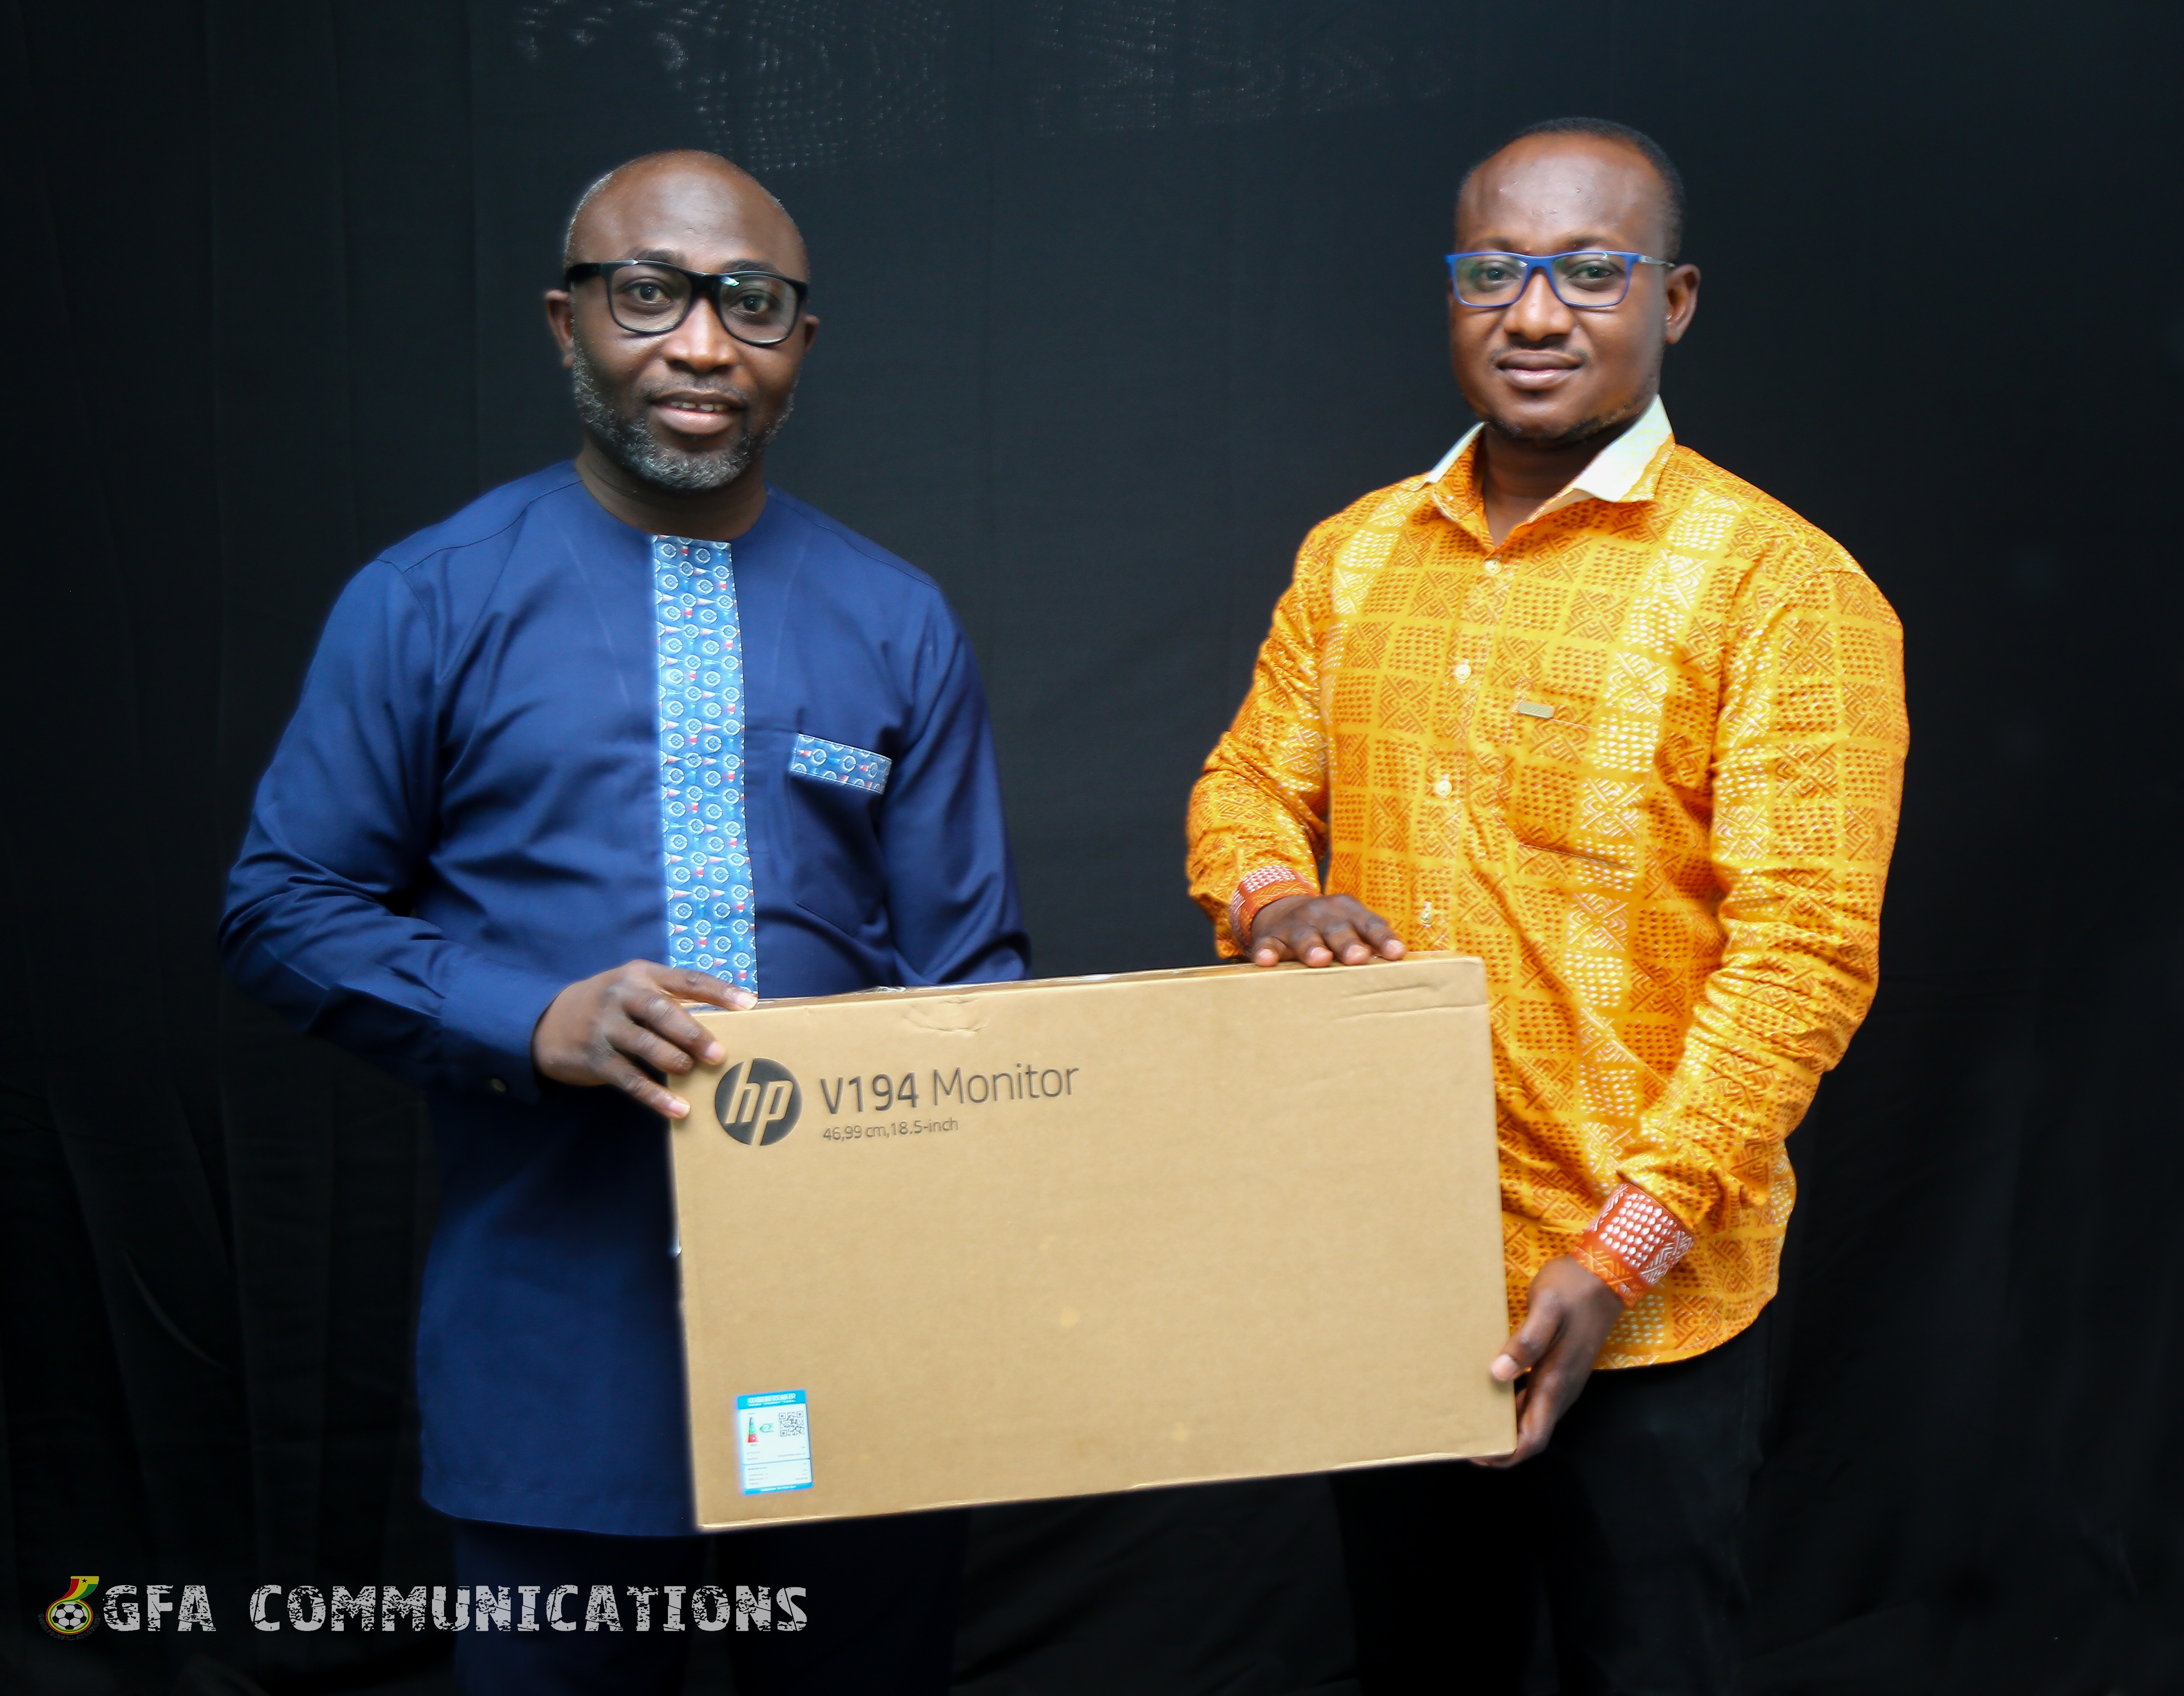 Premier League Clubs receive Office & Internet Connectivity equipment from GFA